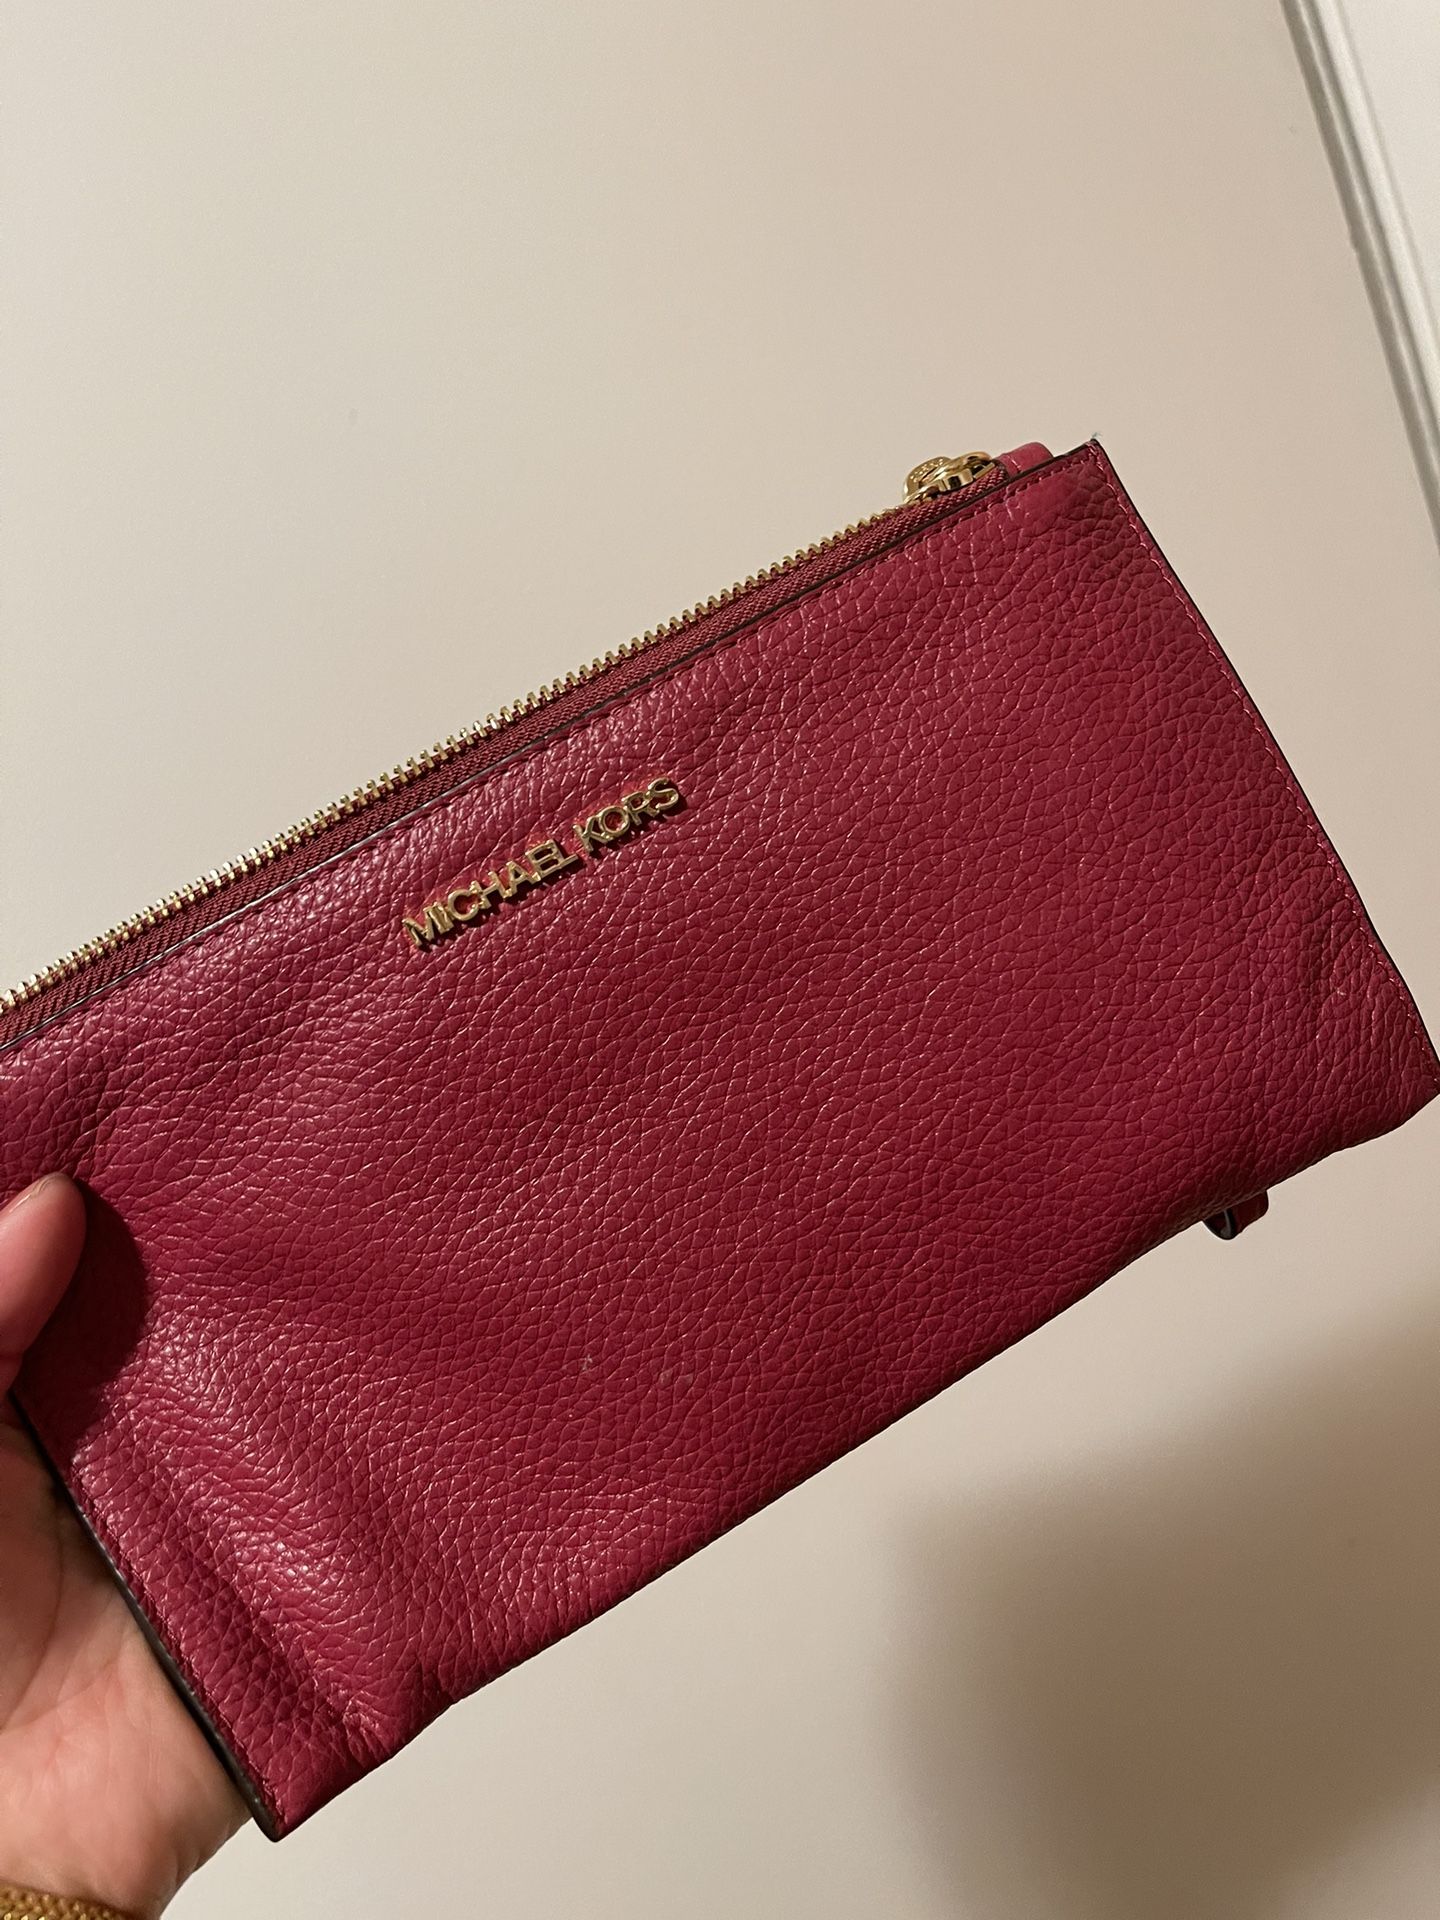 Michael Kors Medium Wristlet for Sale in Atwater, CA - OfferUp